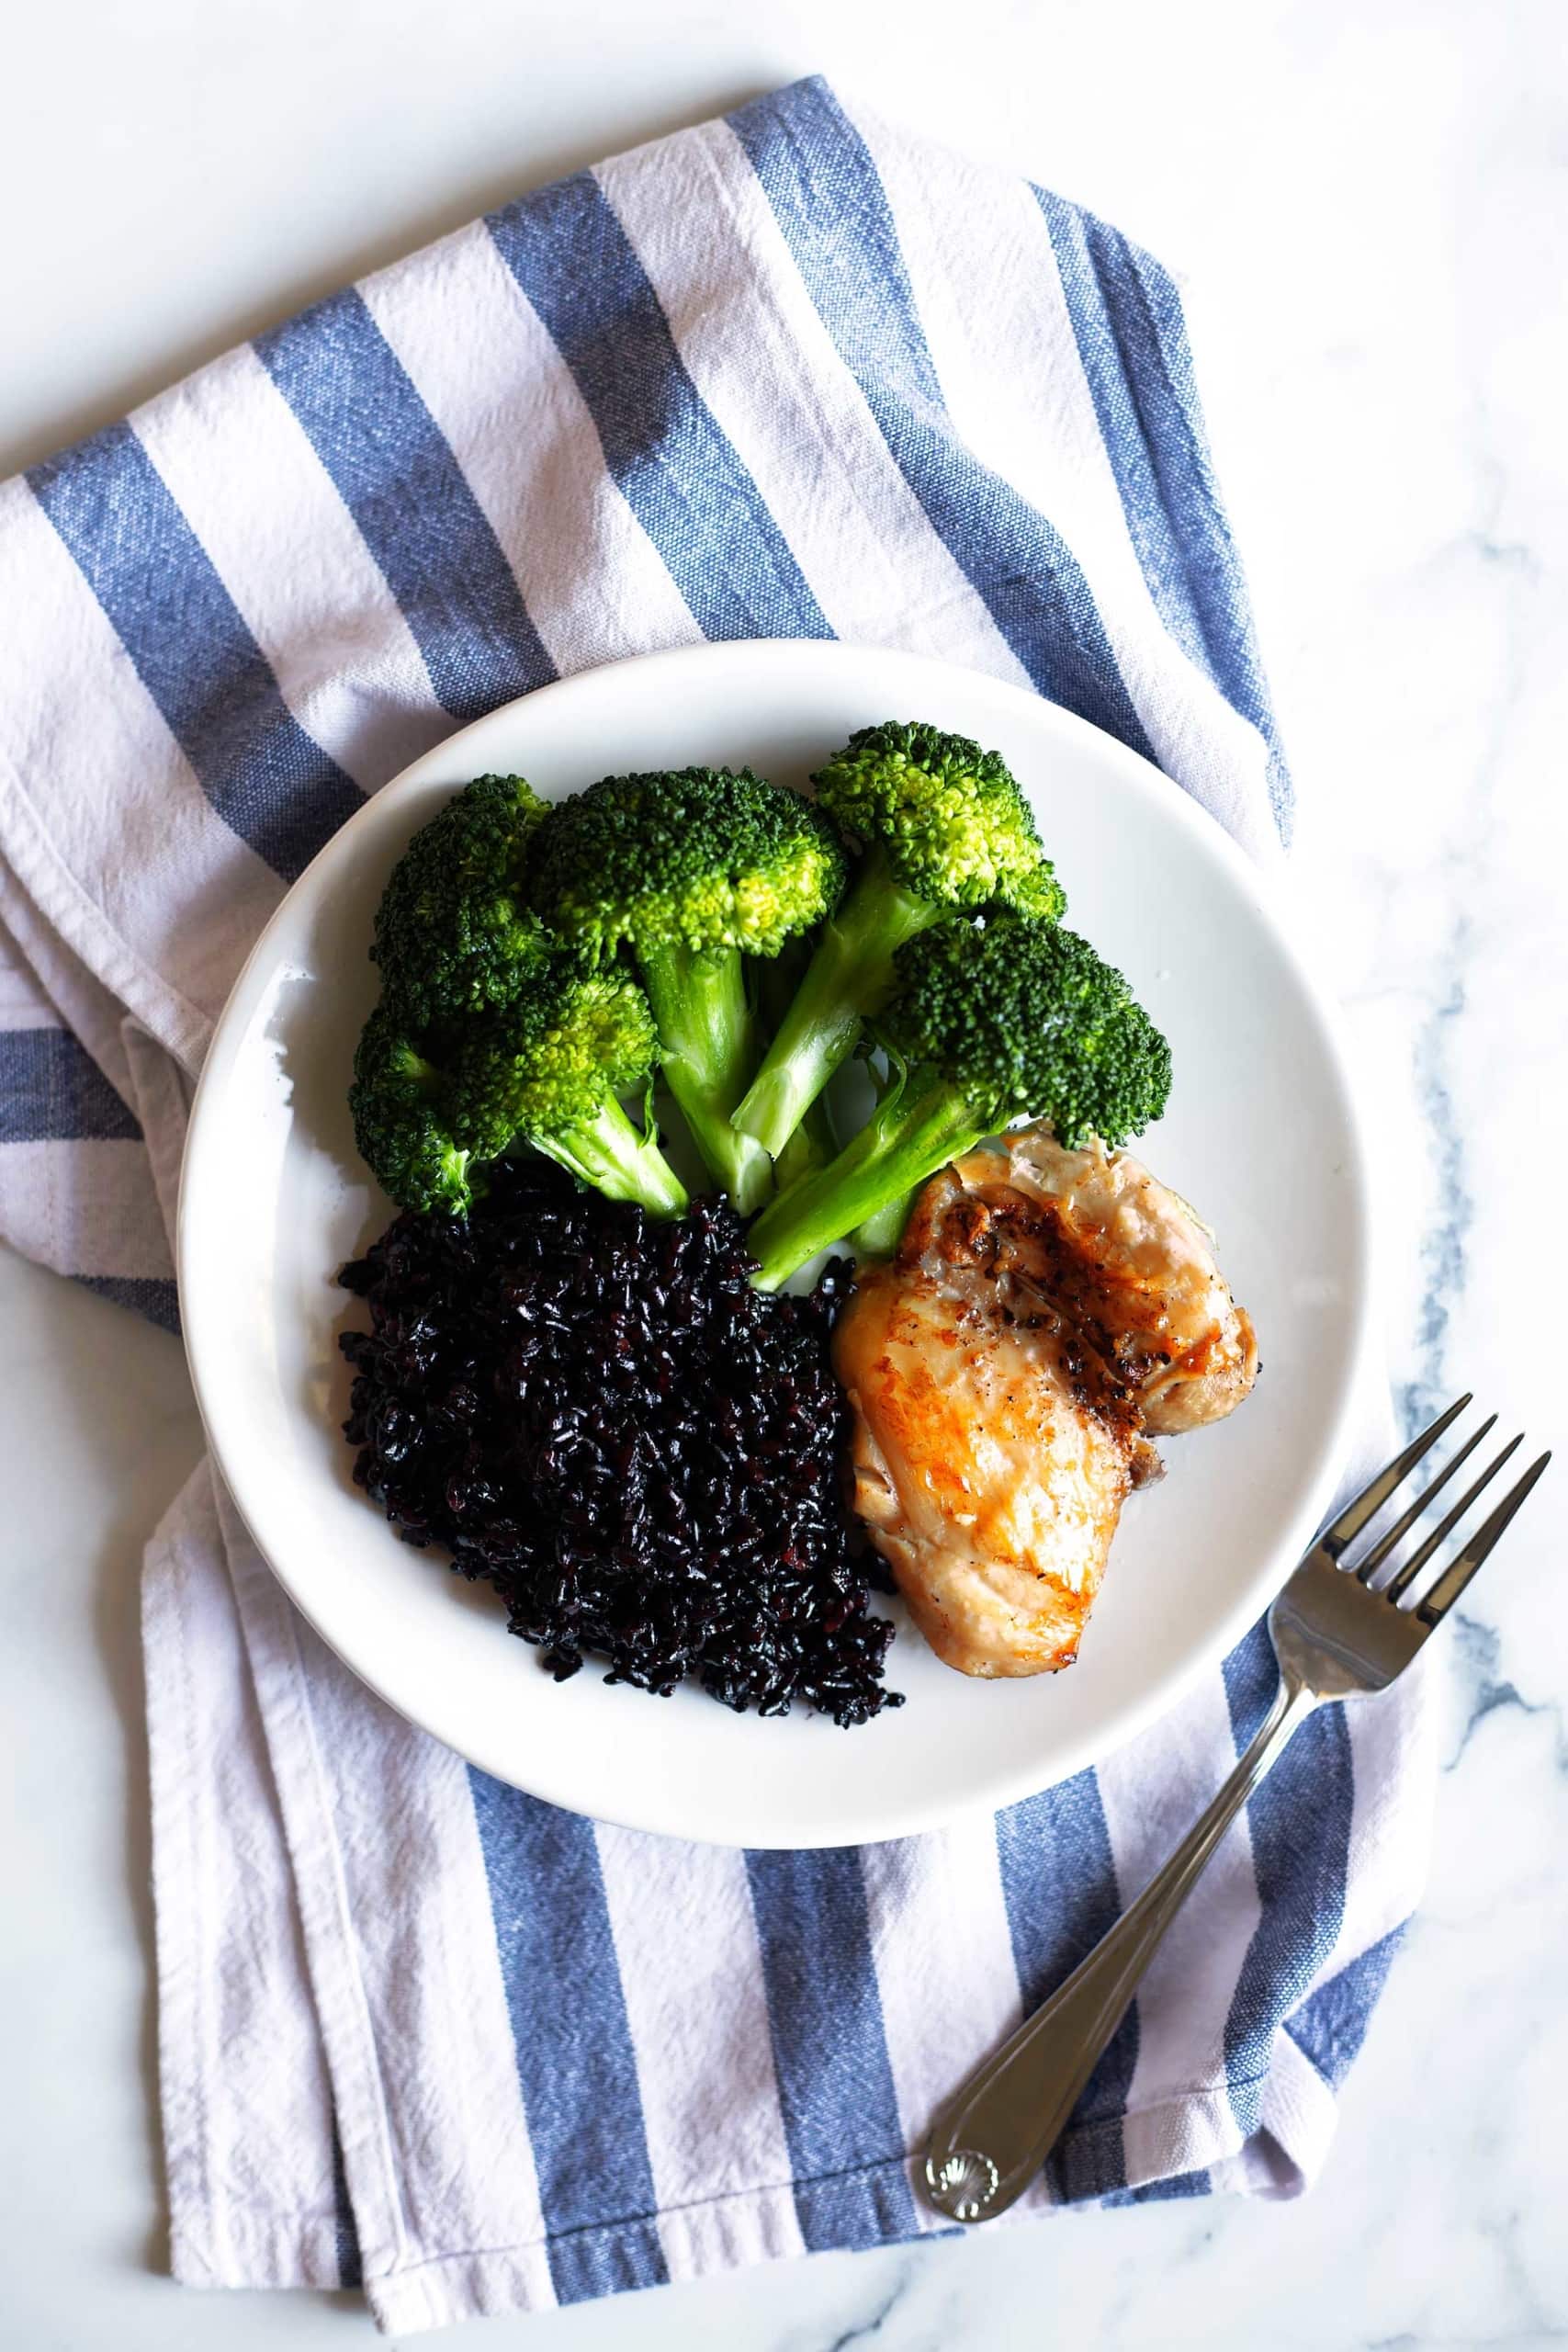 Just 3 ingredients and 3 minutes to prep! This easy Instant Pot recipe is perfect for a quick weeknight meal! The chicken thighs, black rice, and broccoli all cook at the same time in the Instant Pot. This recipe is Whole30, paleo, gluten free, and dairy free. #healthydinner #healthylunch #instantpotdinner #instantpot #chickenthighs #blackrice #paleodinner #whole30dinner #shrimp #chickenrecipe #healthyeating #mealprep #mealprepideas #whole30recipes #paleorecipes #glutenfreedinner #whole30lunch #paleo 